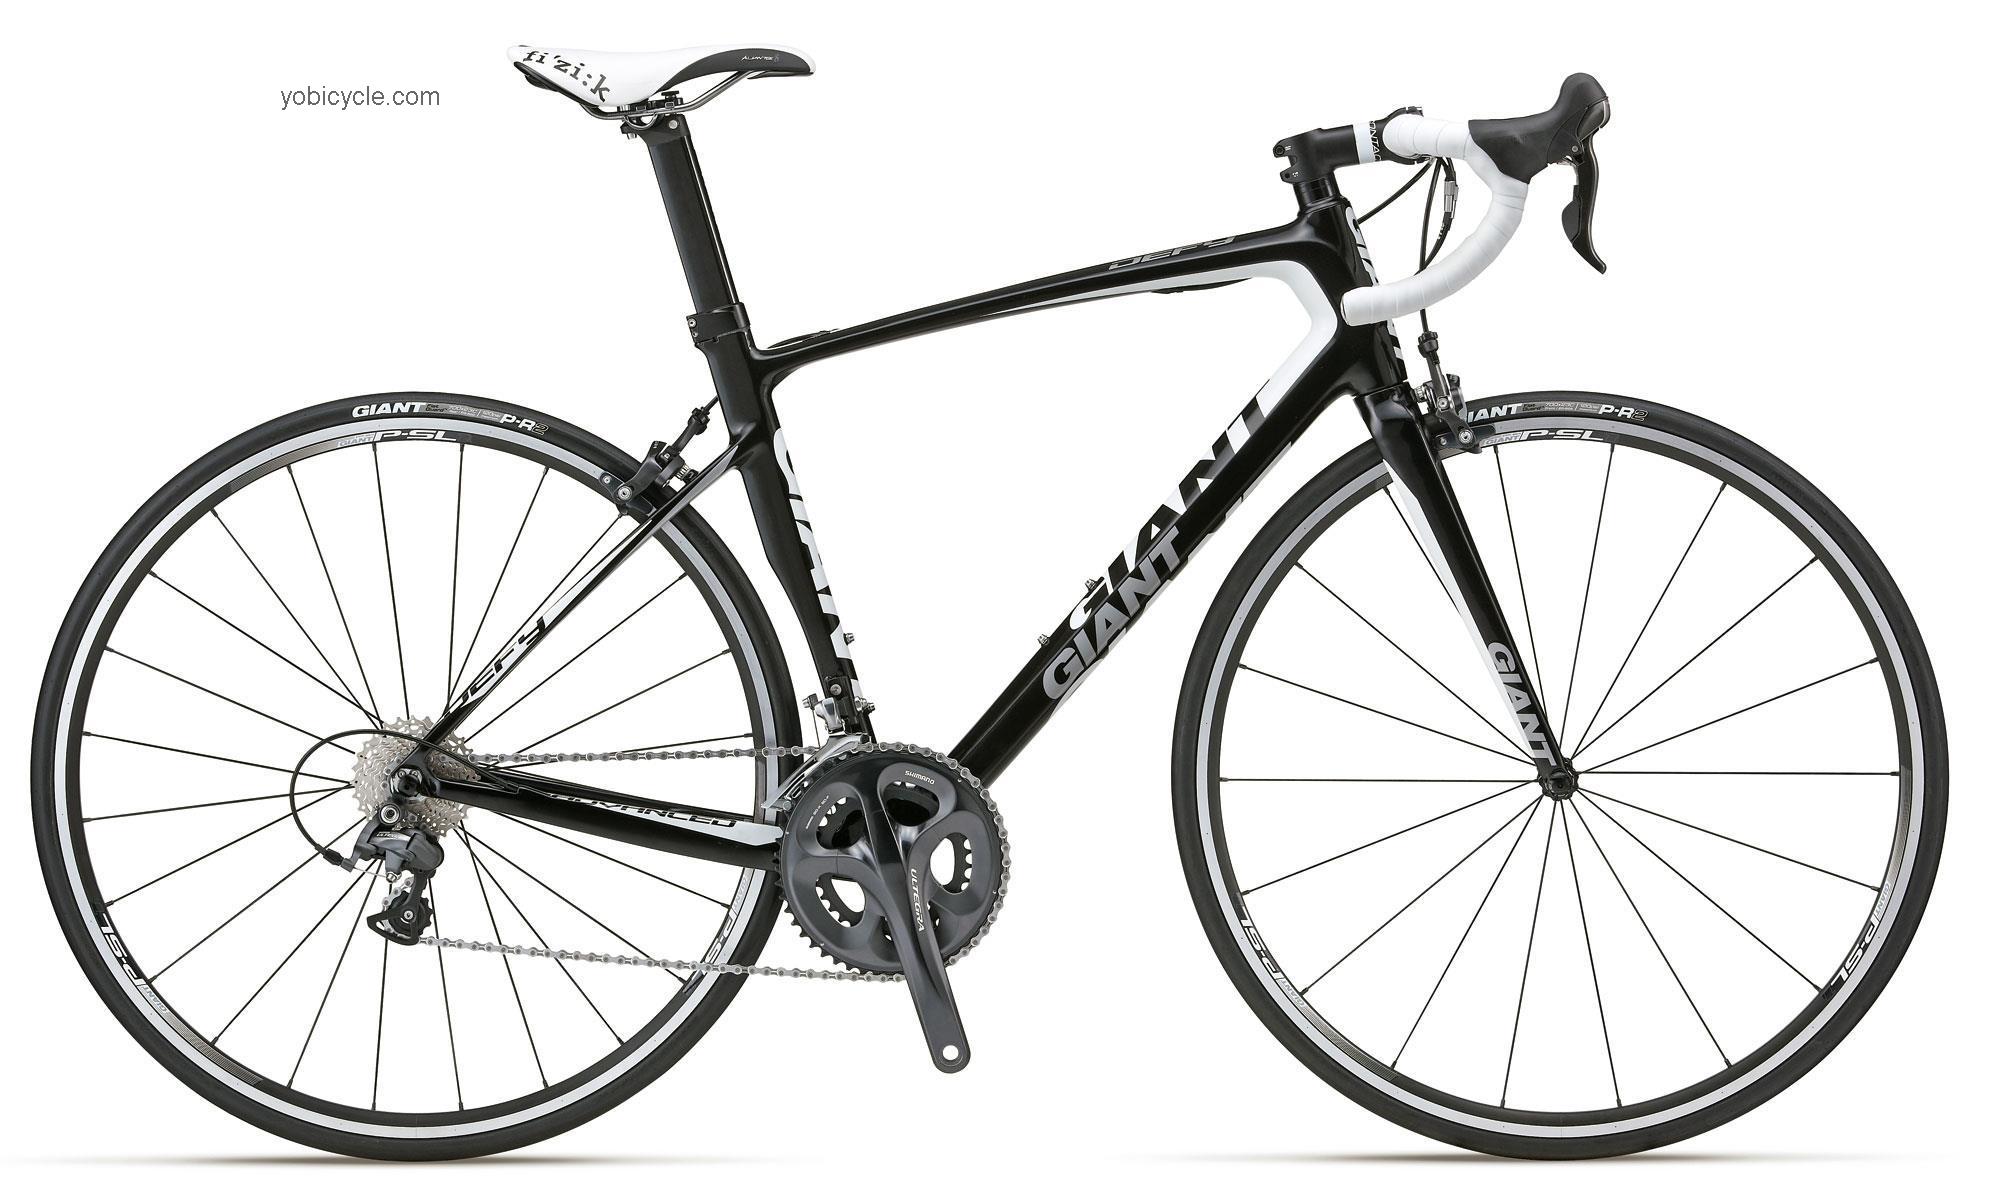 Giant Defy Advanced 2 2012 comparison online with competitors